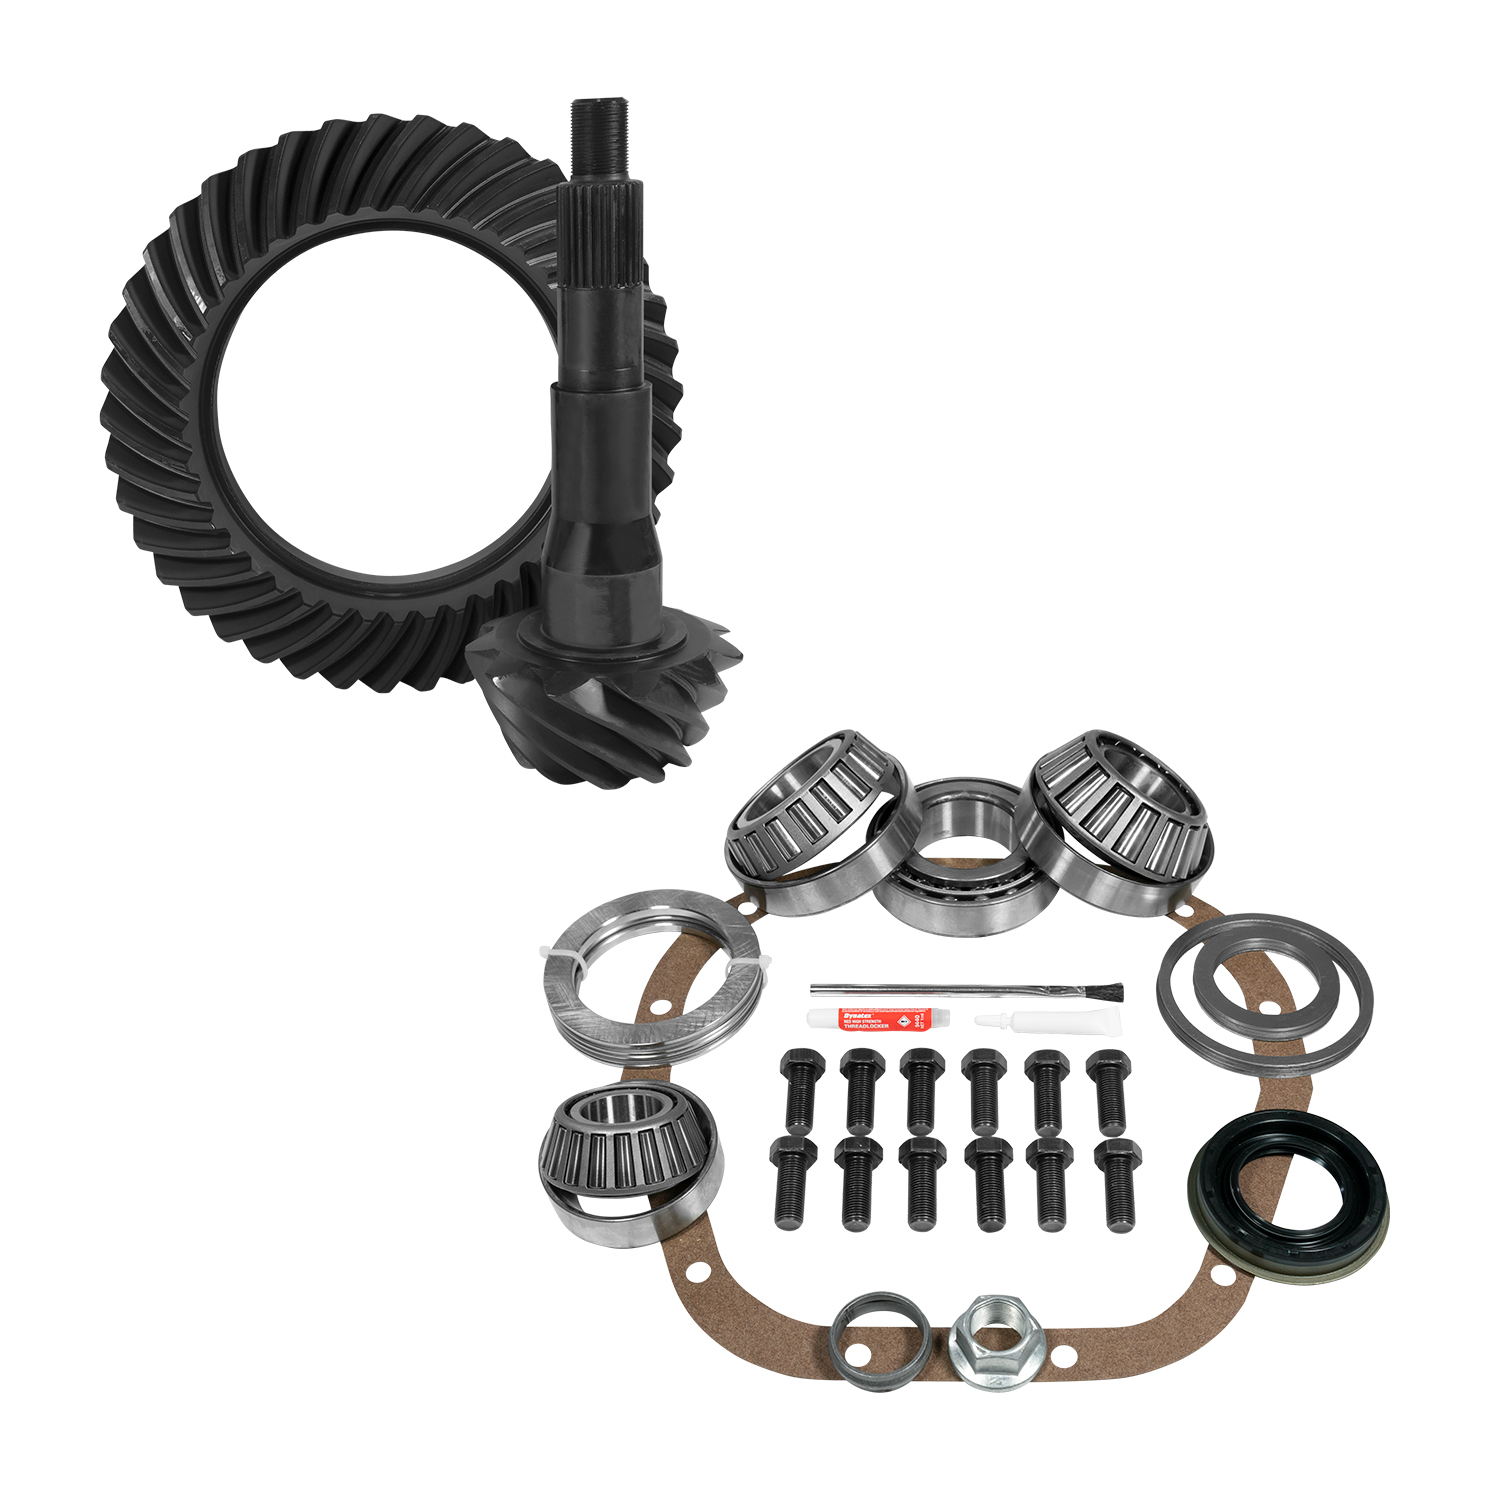 USA Standard 10848 Ring & Pinion And Install Kit, 10.5 in. Ford, 3.73 Rear